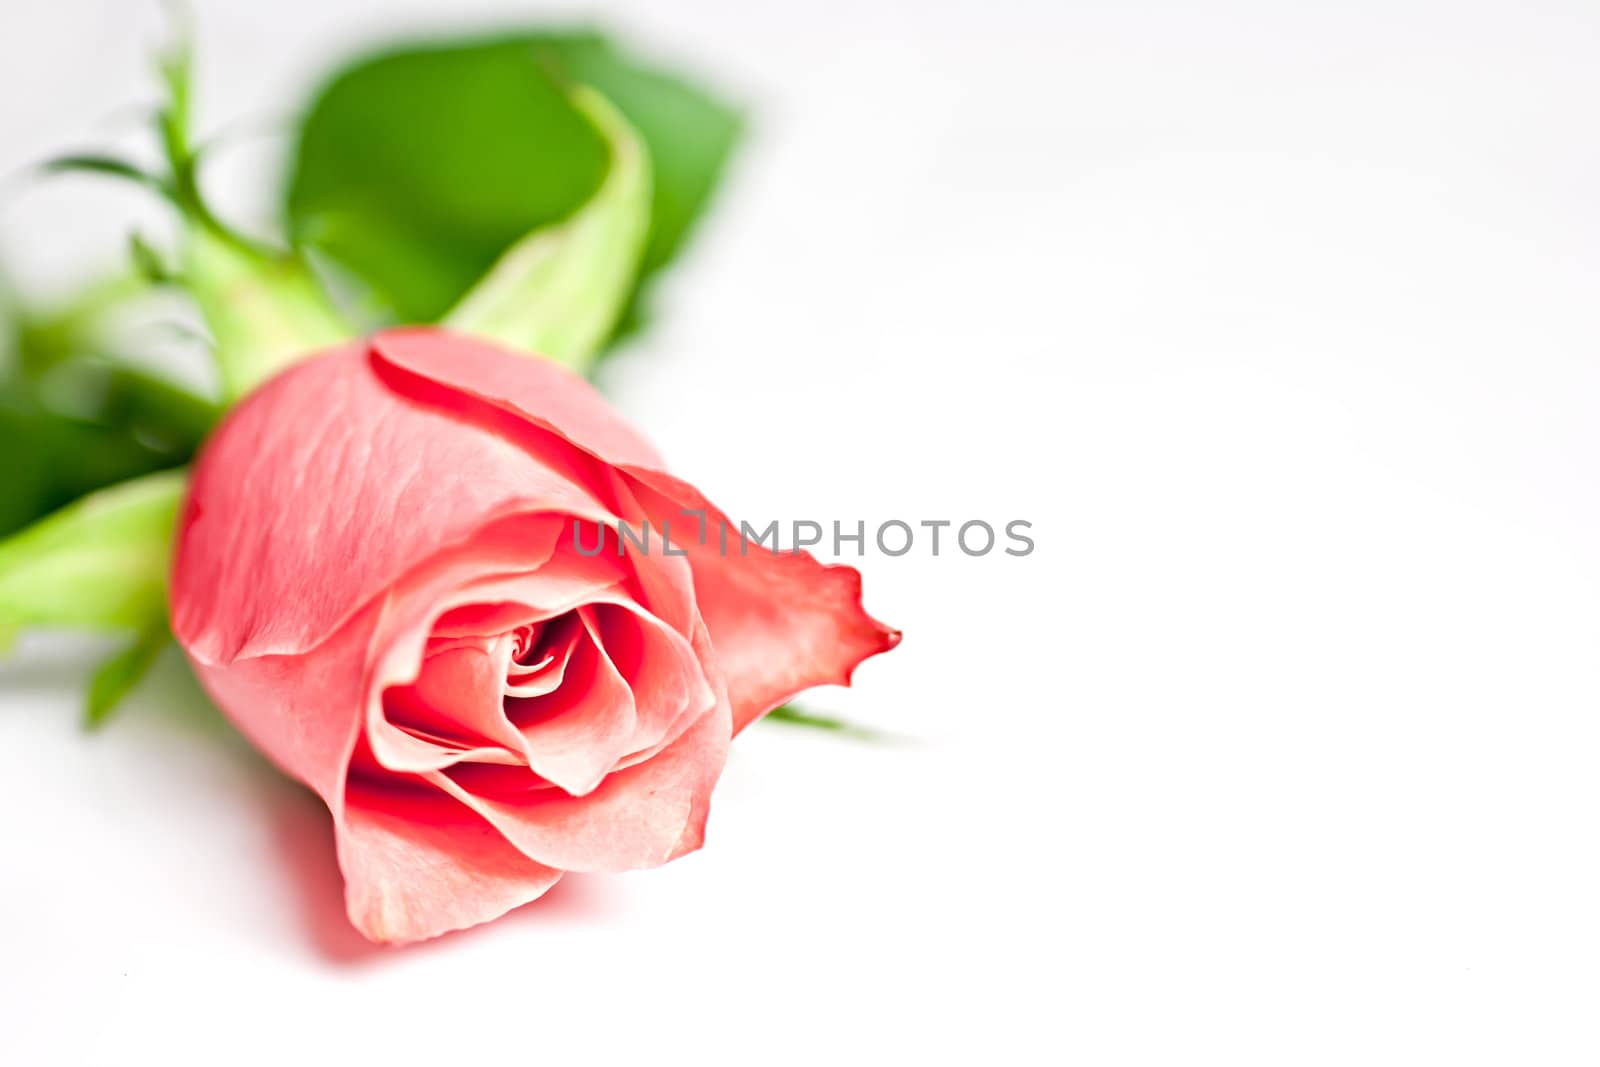 On a white background pink rose, macro photography.
